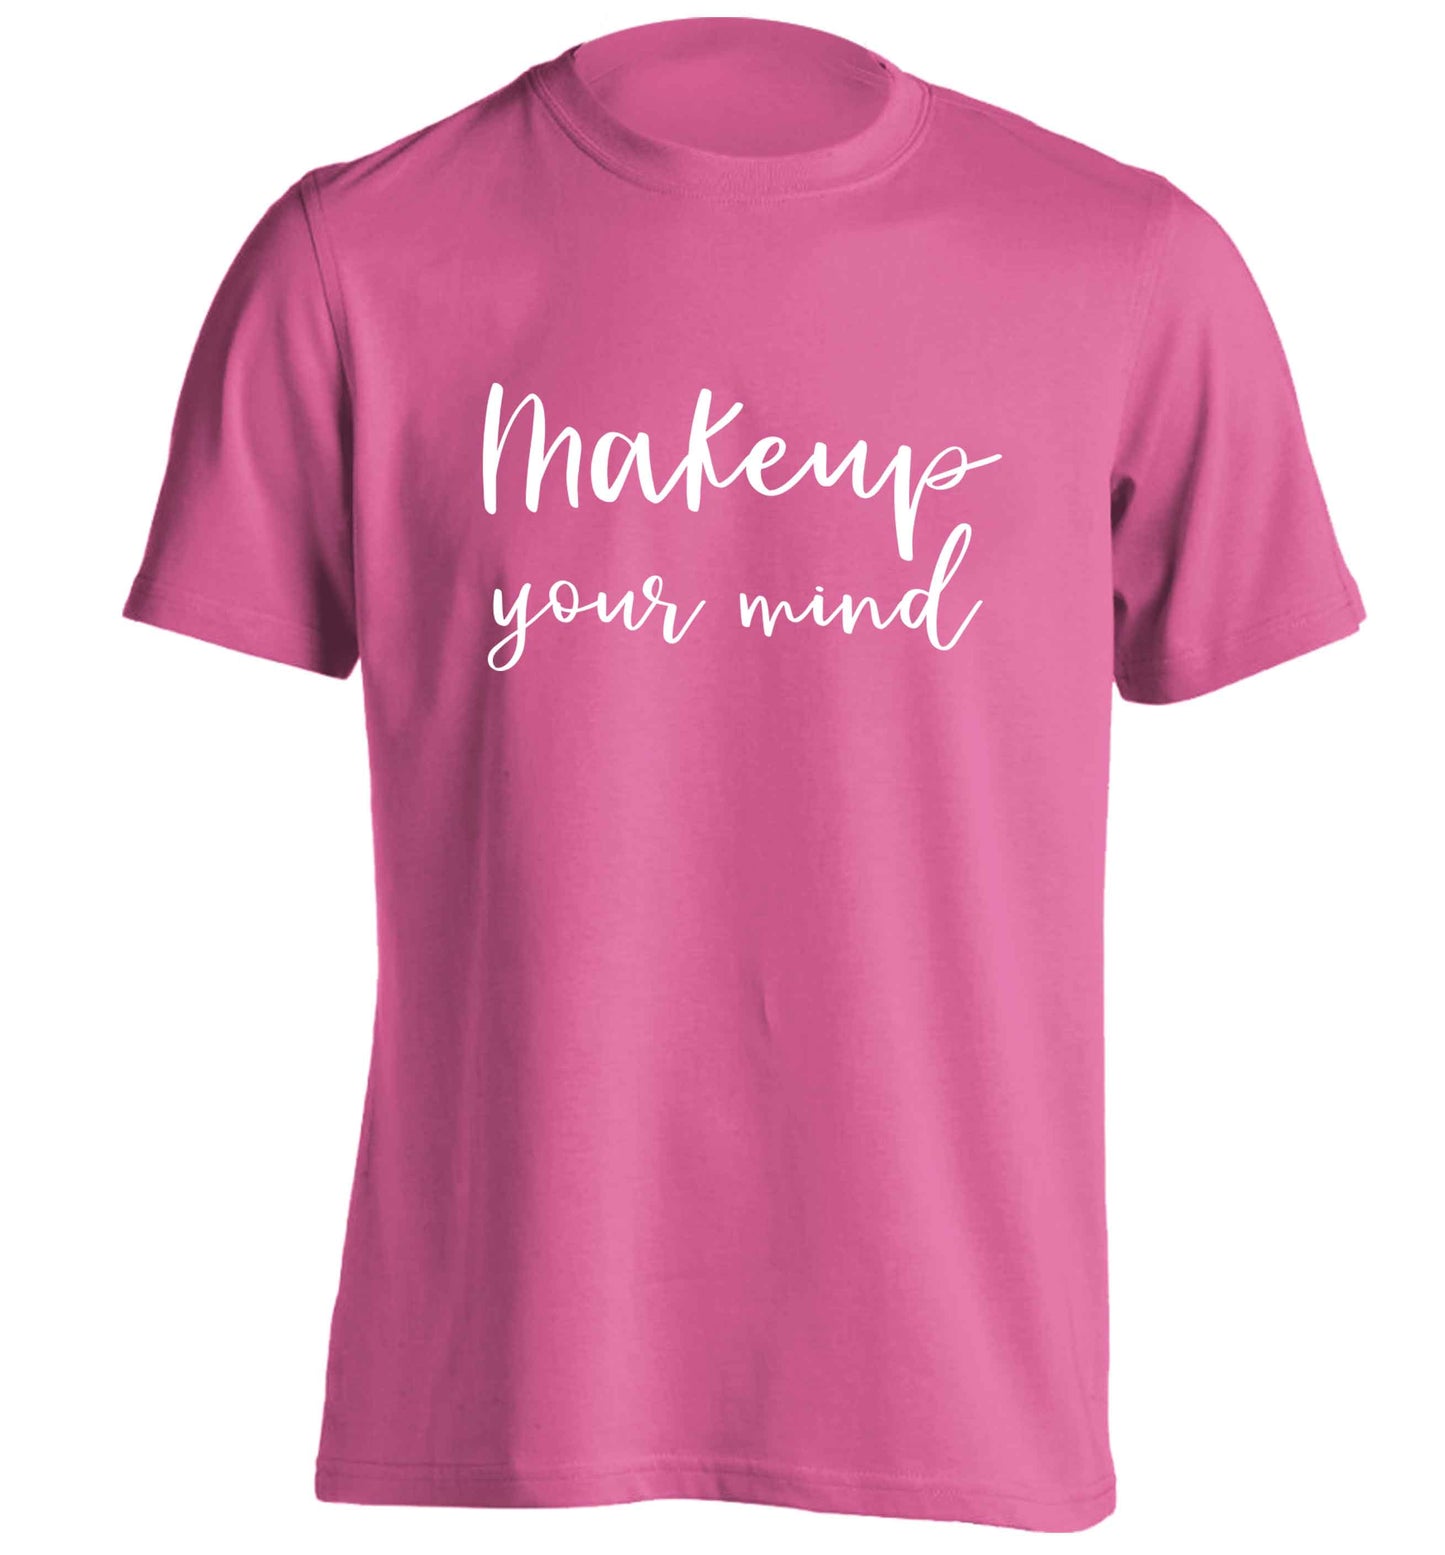 Makeup your mind adults unisex pink Tshirt 2XL